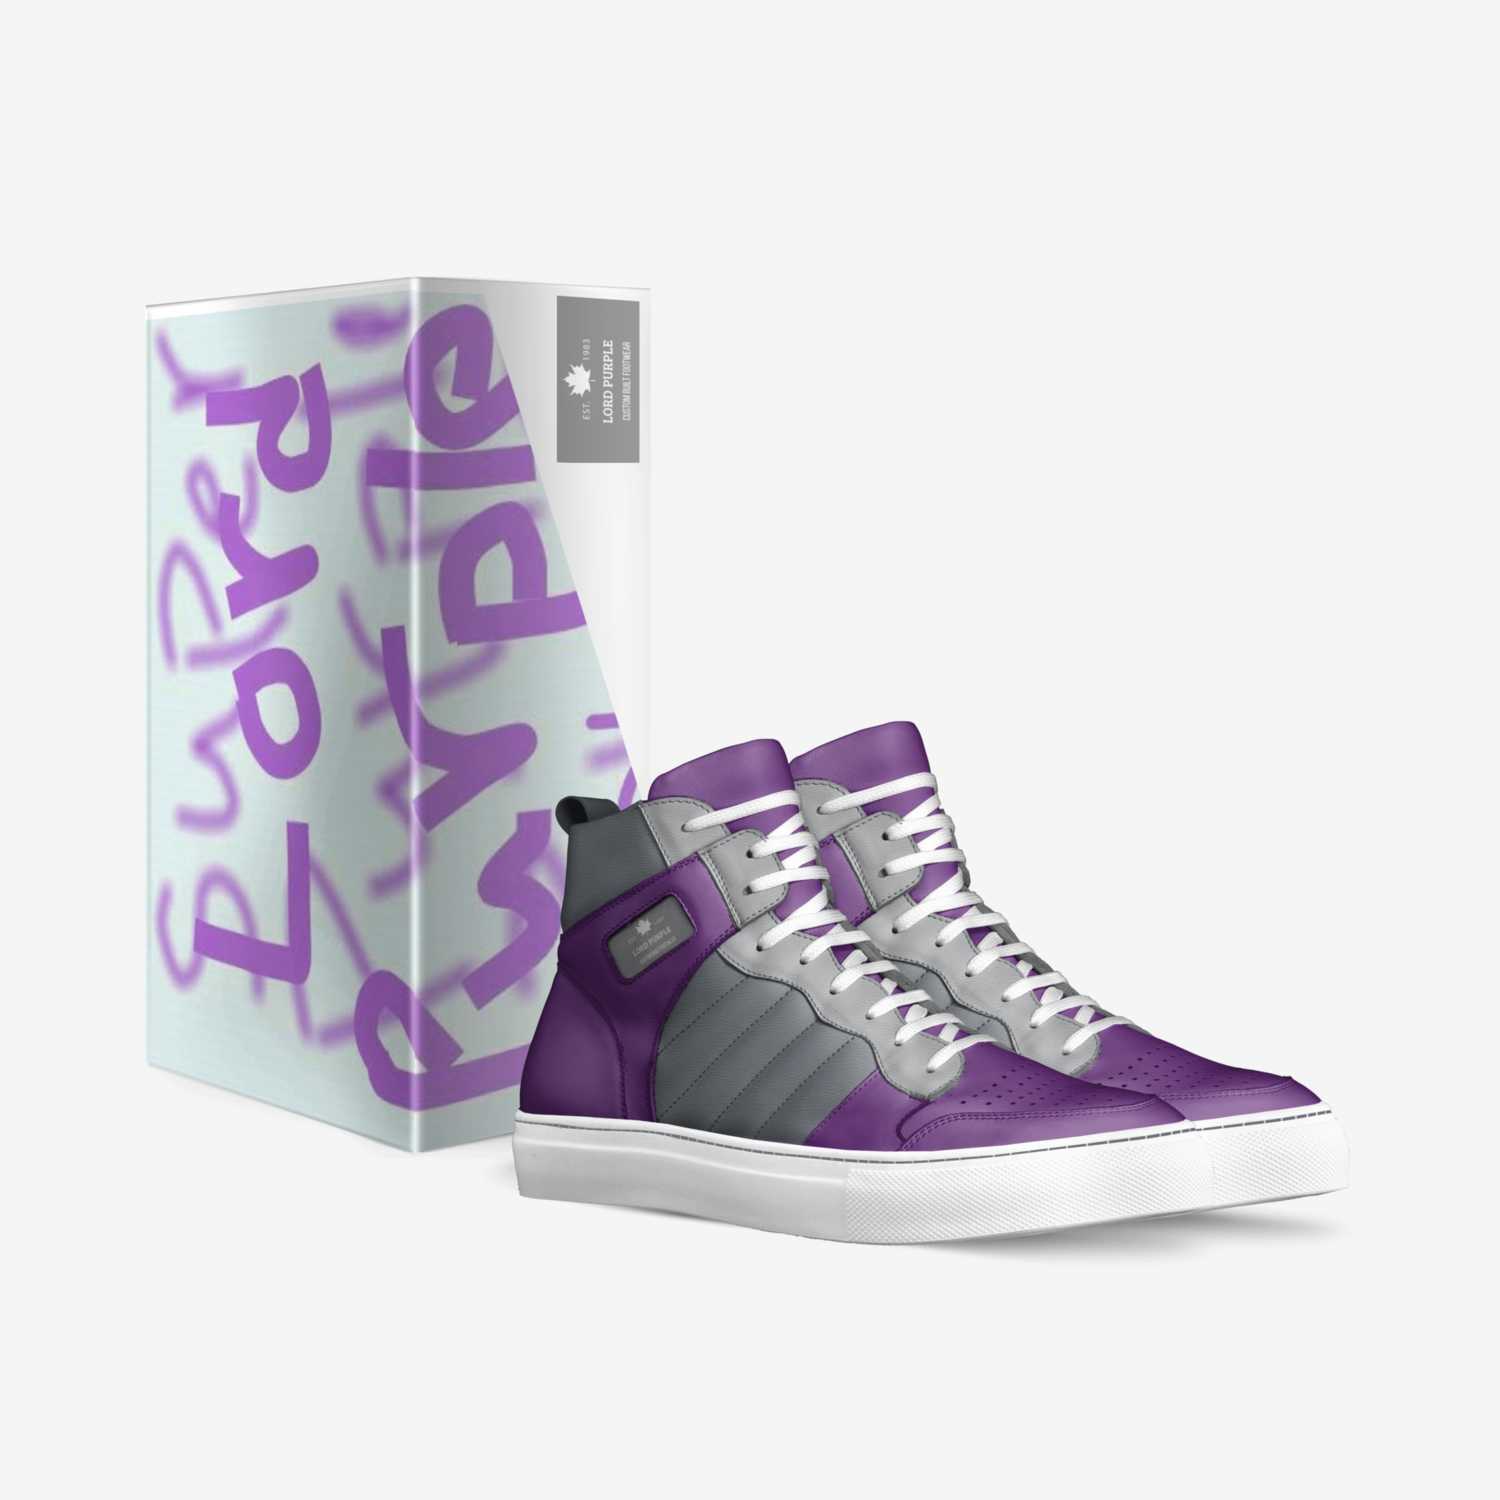 LORD PURPLE custom made in Italy shoes by Raphael Goins | Box view